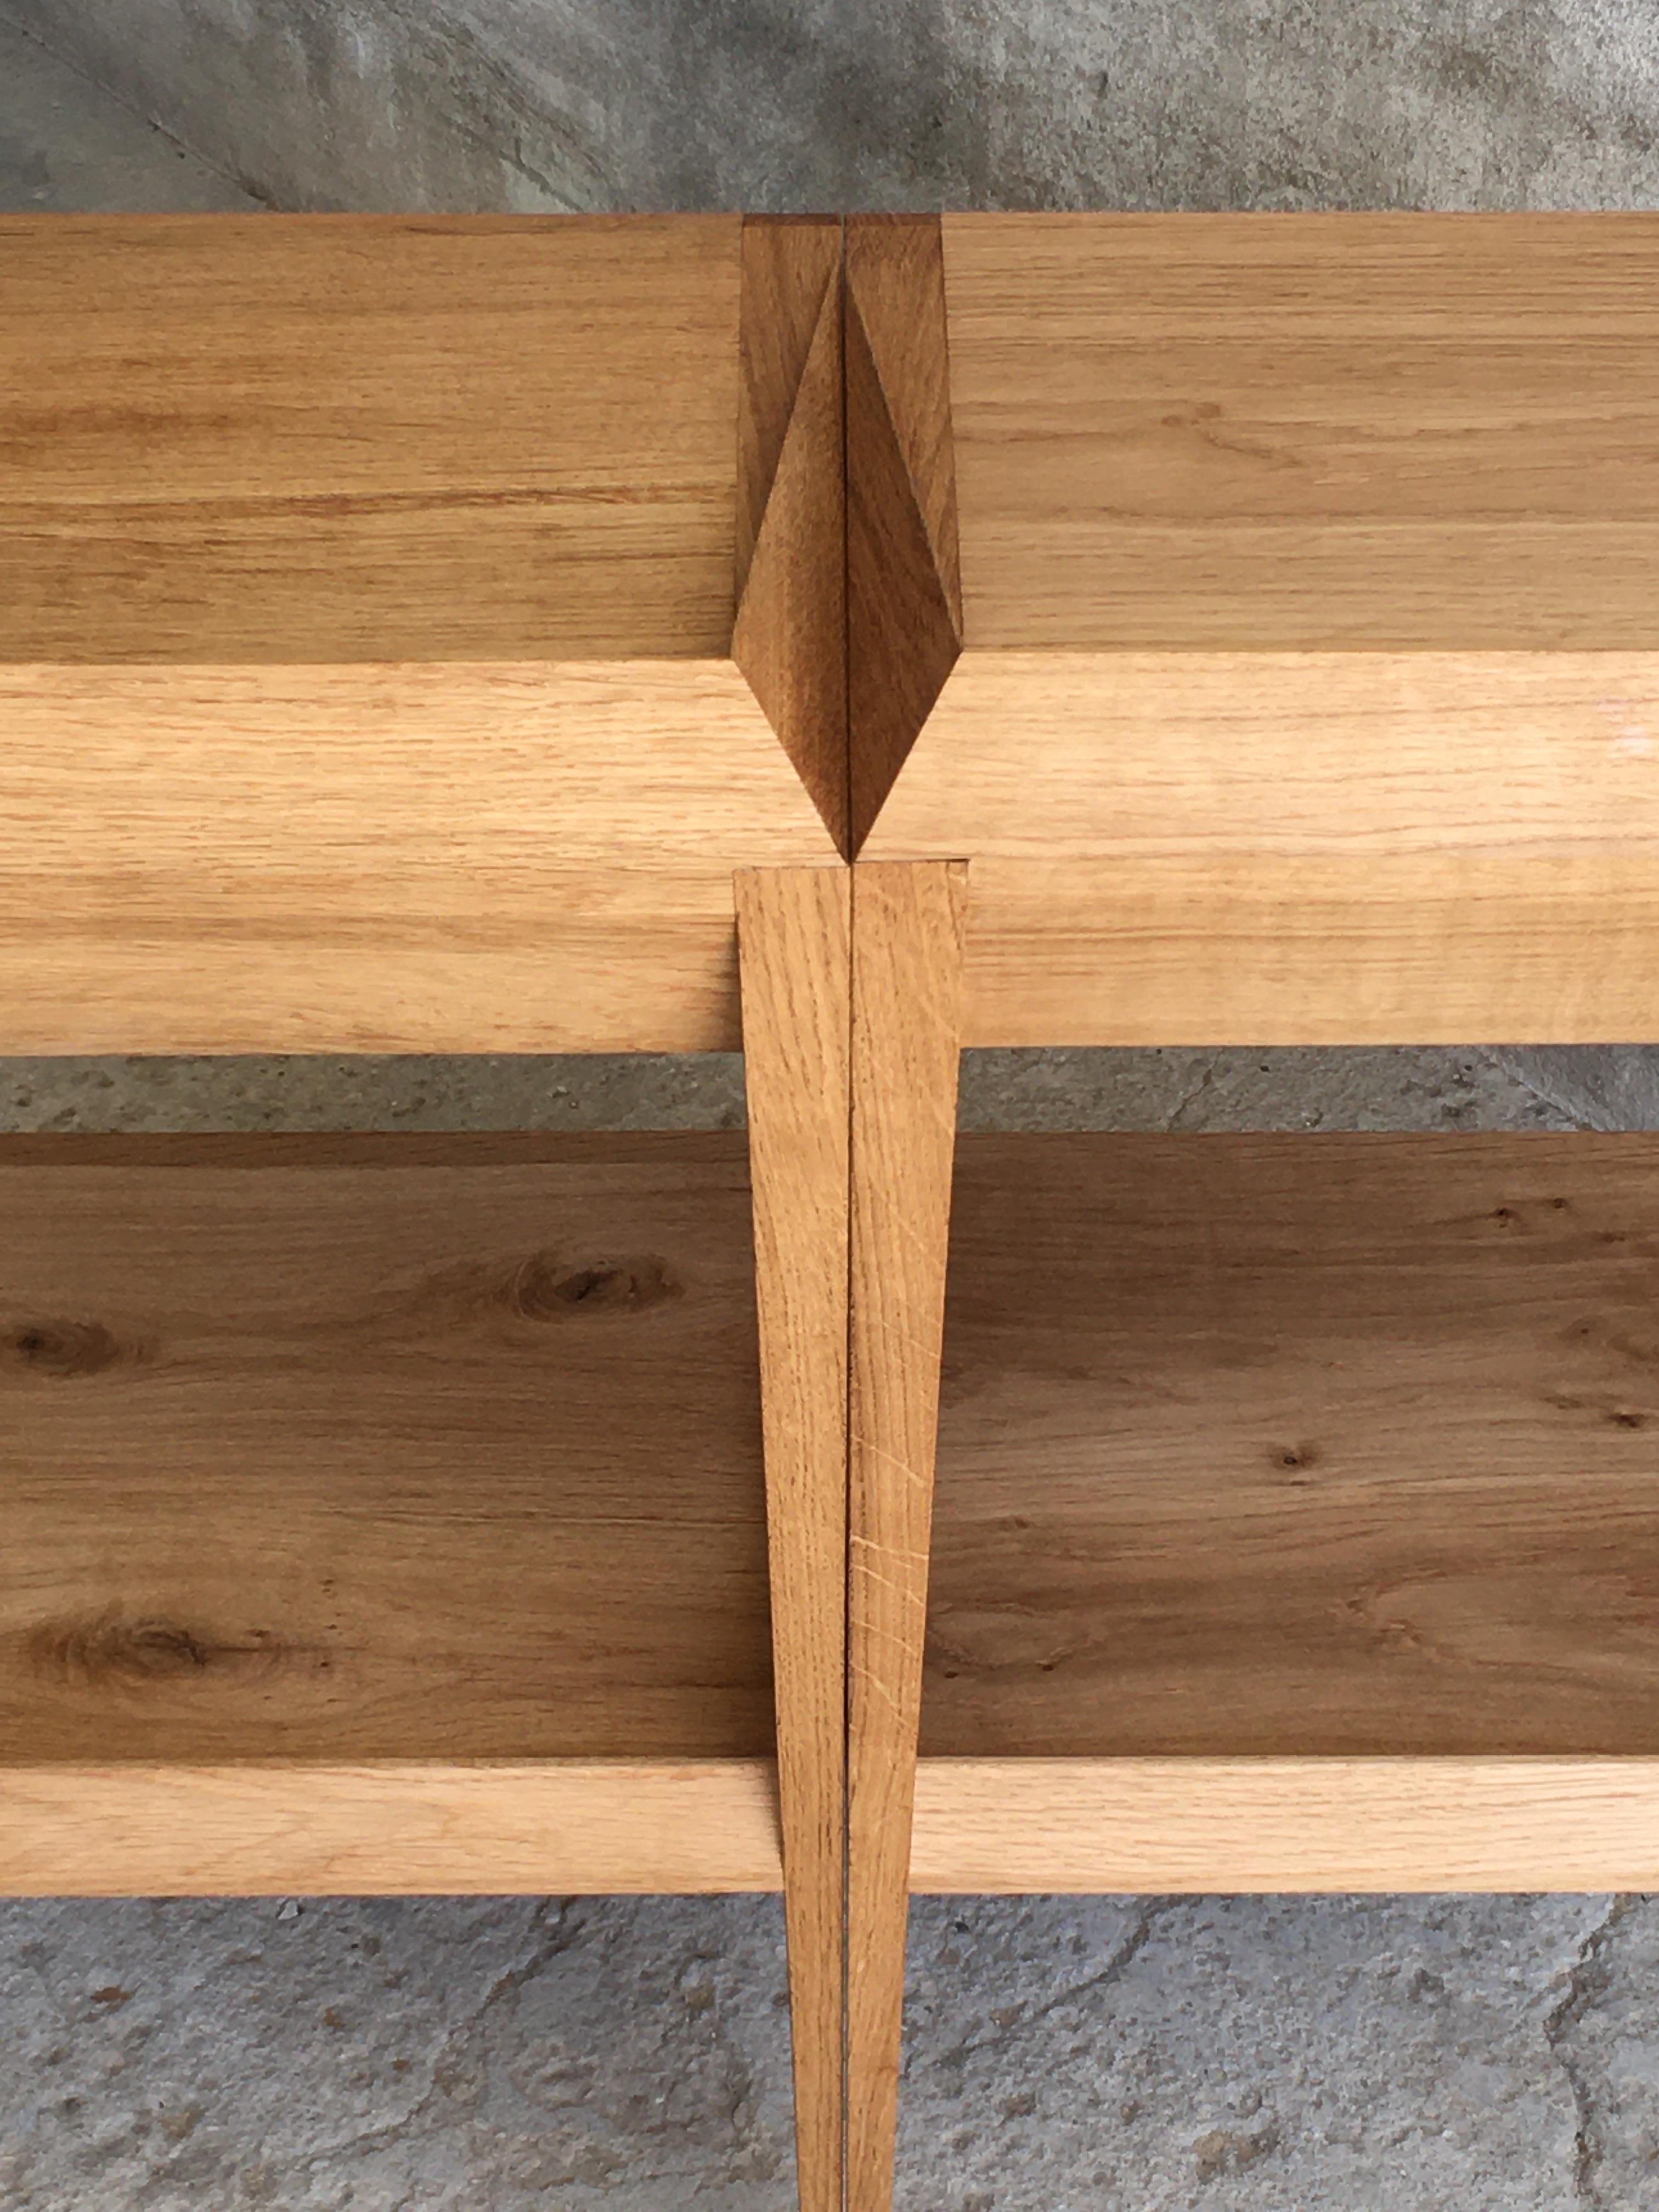 This carefully designed and handcrafted pair of bedside tables with very thin legs, designed and made by Tomaz Viana have a sculptural top part with a hidden small drawer. It´s geometrical shape,  feels modern but the fine woodwork keeps it